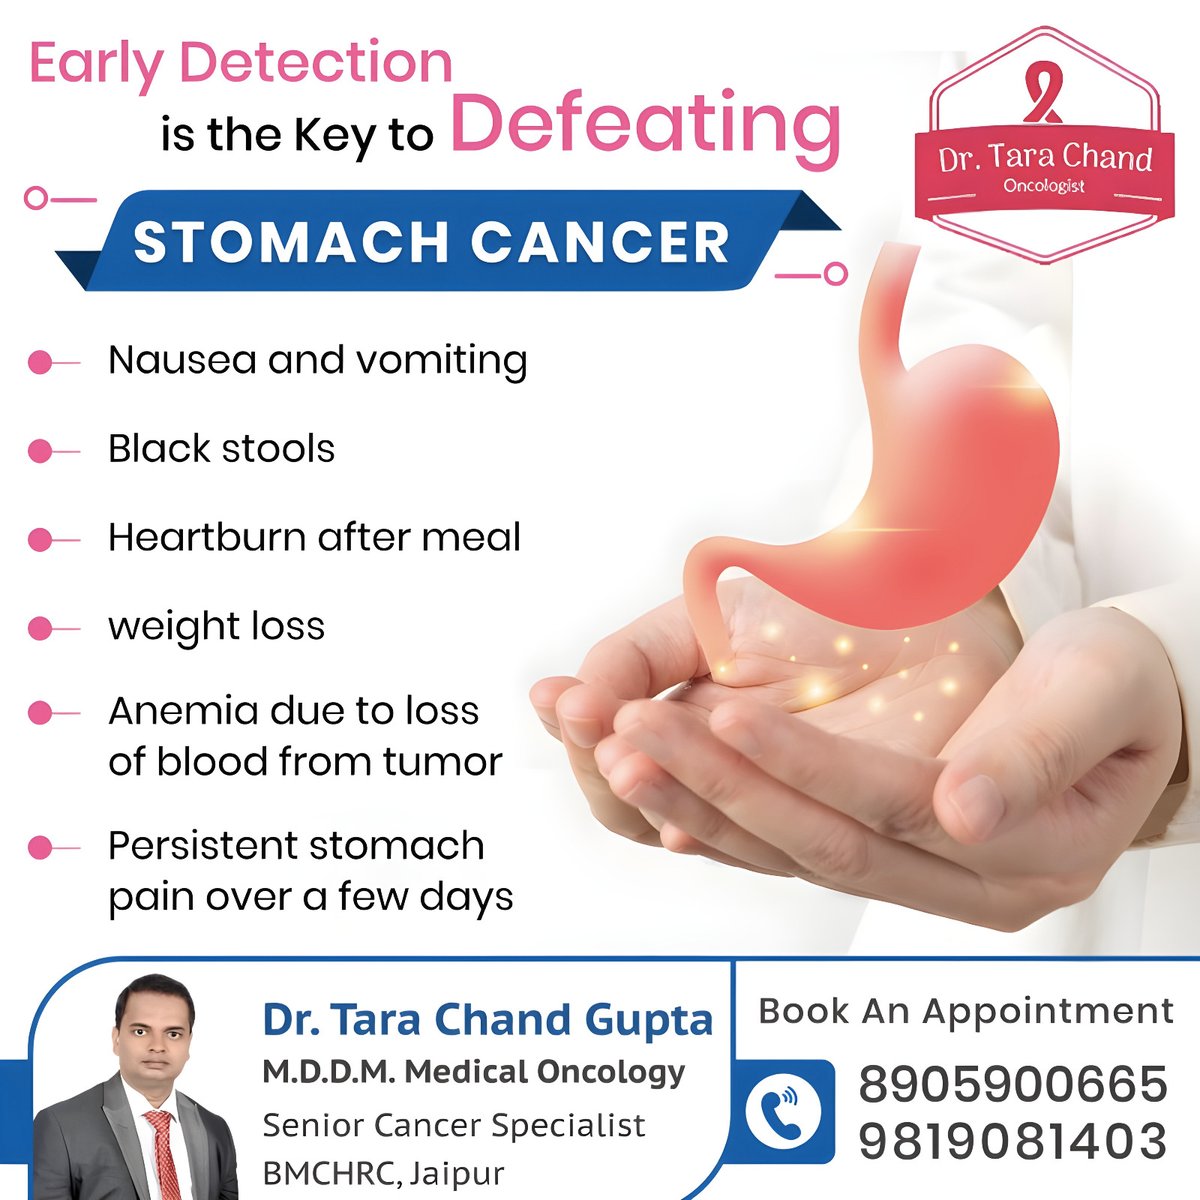 📷 Early detection saves lives! Recognize the signs of stomach cancer and take action.

Consult :-8905900665, 9819081403

#StomachCancer #GastricCancer  #CancerFree #EarlyDetectio #Cancer #StopCancer #ConsultToday #DrtarachandGupta #MedicalOncologist #BMCHRC #Rajasthan #Jaipur